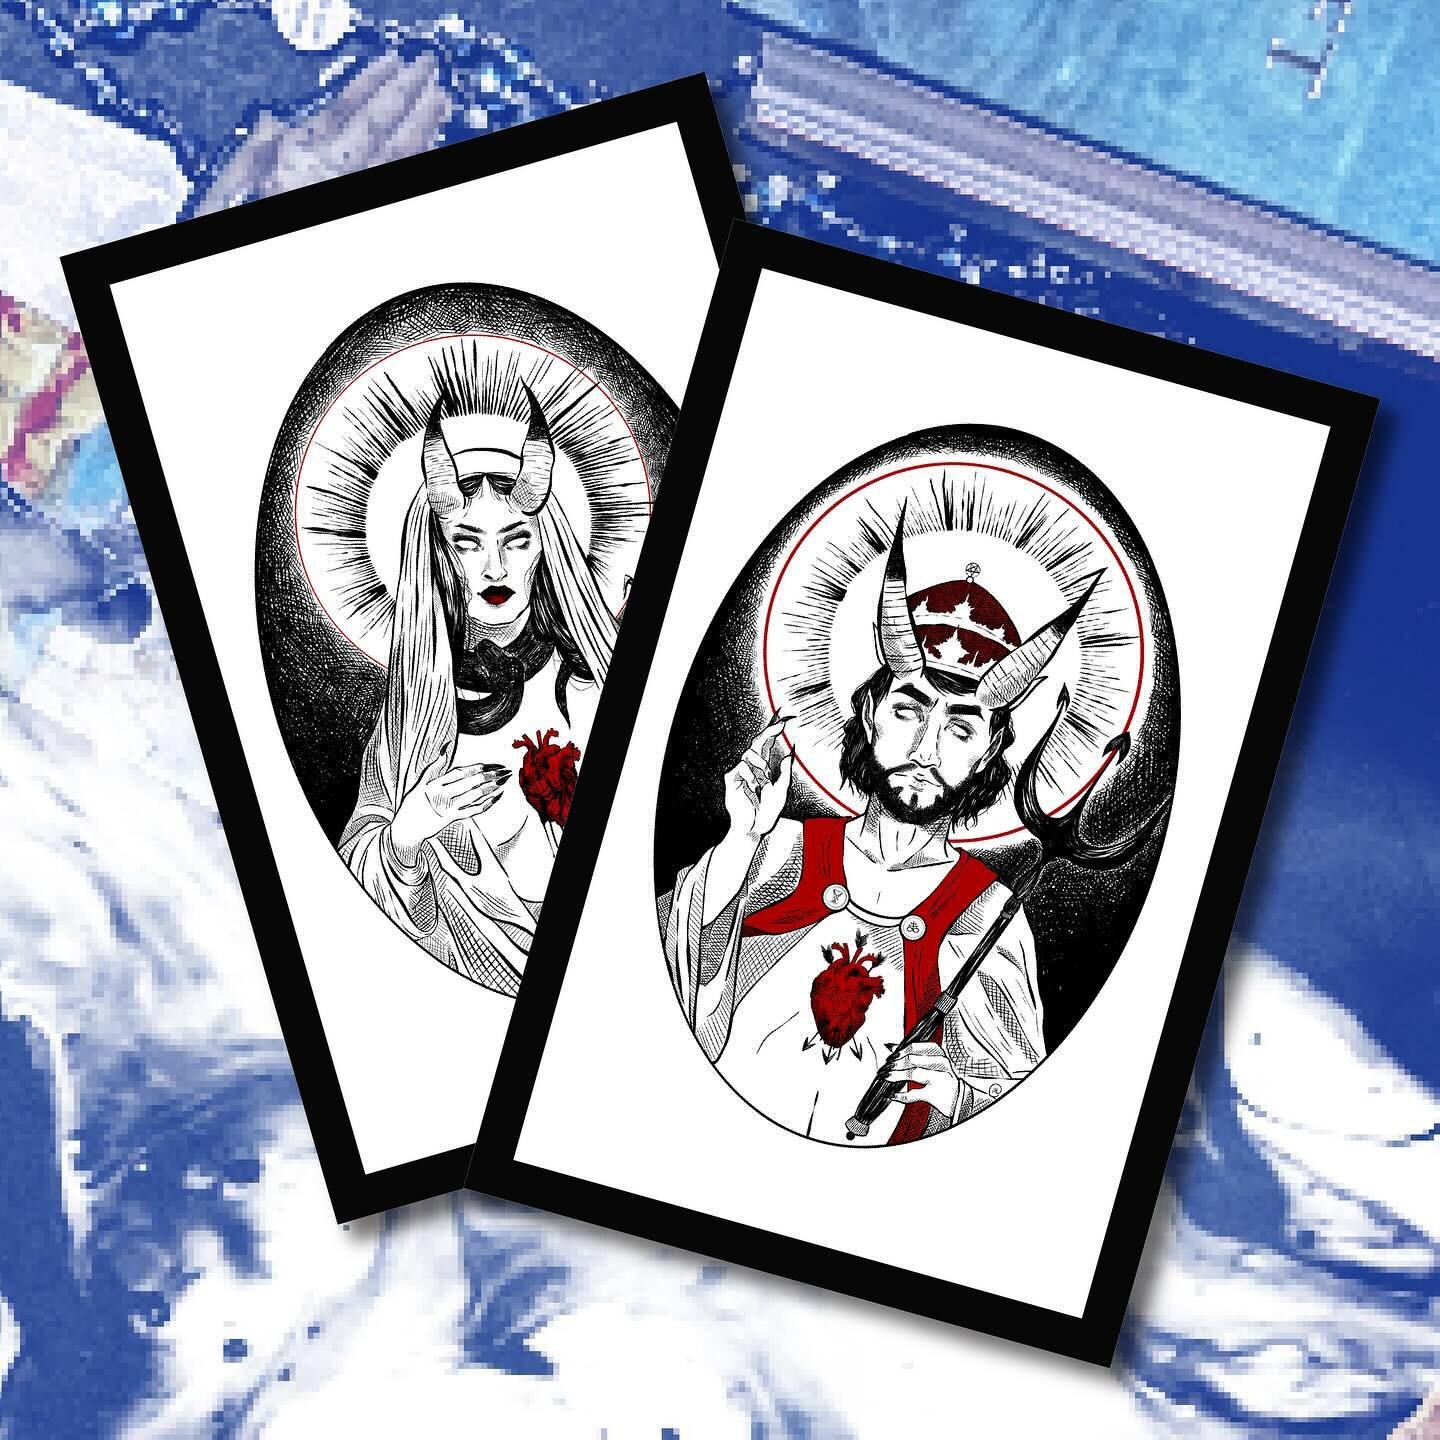 The ultimate power couple. 🫀 Get your lover a set of Lucifer and Lilith posters, prints, and stickers this weekend during @marketofthebeast and @altstreetmarket 

#valloween #lupercalia #valentinesdaygift #gothvalentine #lucifer #lilith #witchcraft 